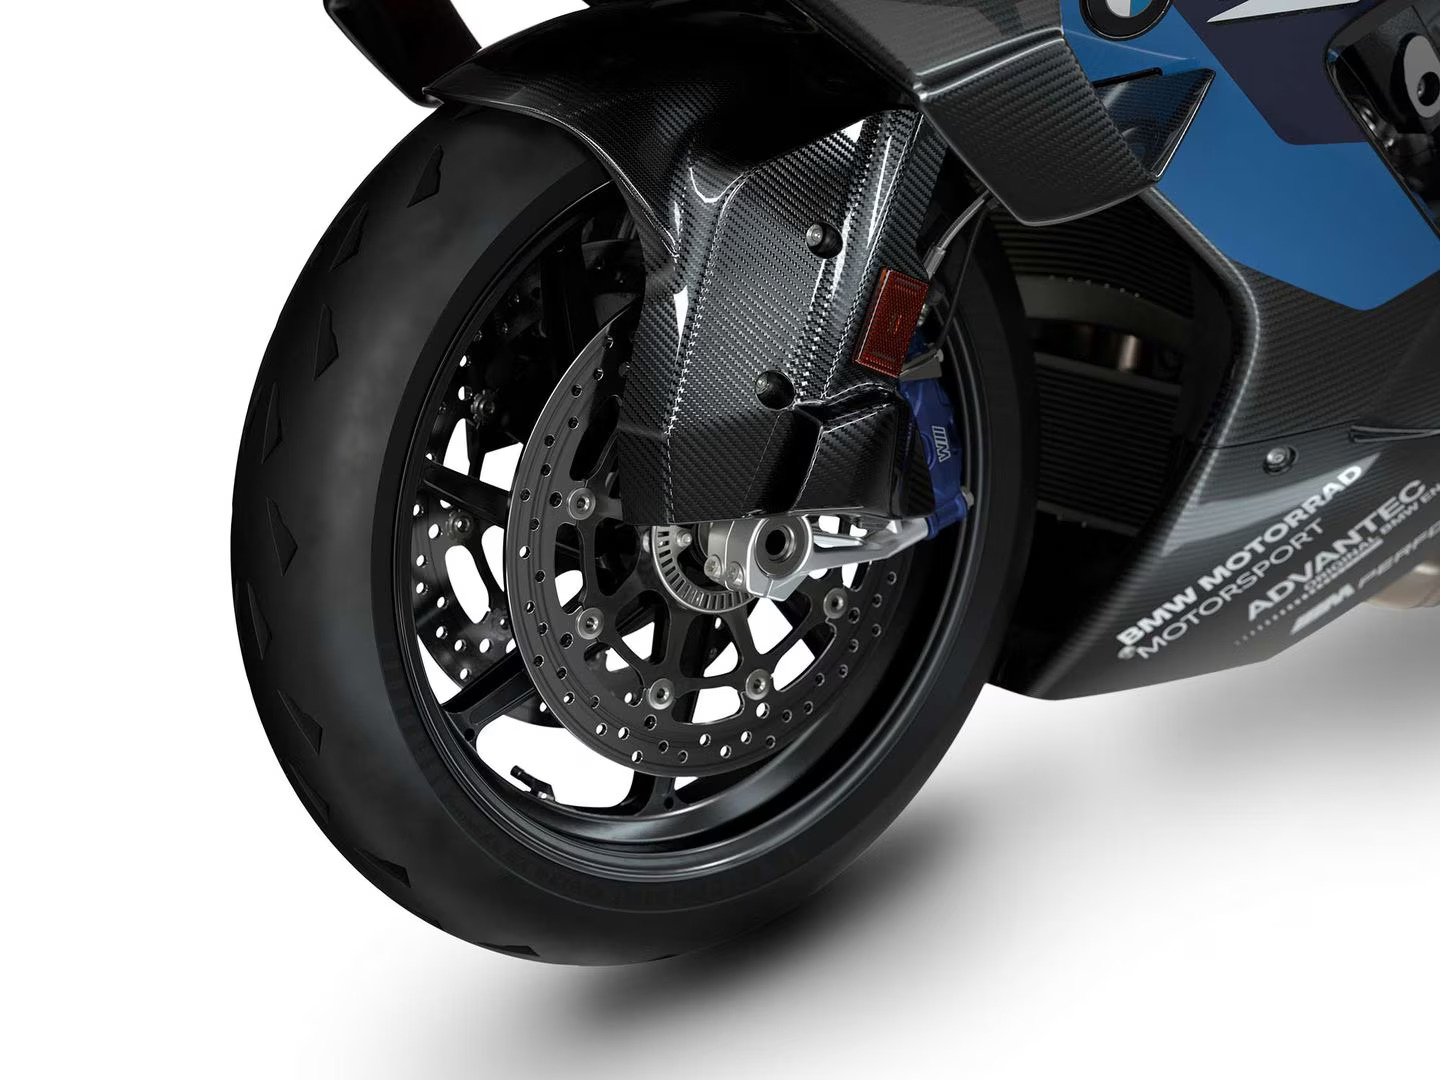 BMW's Most Expensive Superbike Launched in India at Rs 49 lakh - photo